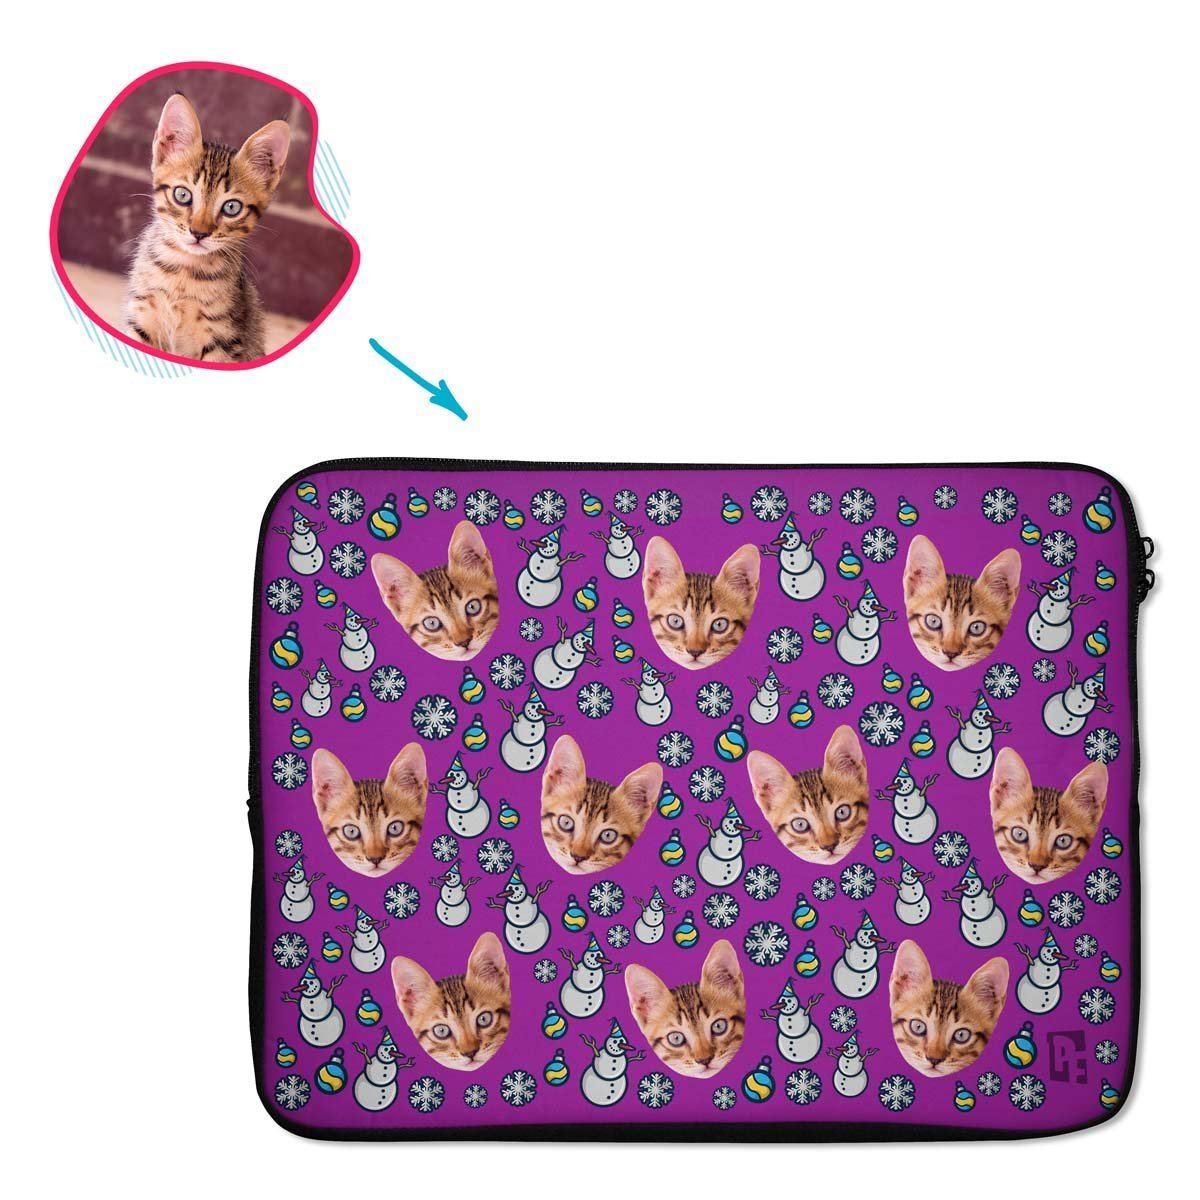 purple Snowman laptop sleeve personalized with photo of face printed on them